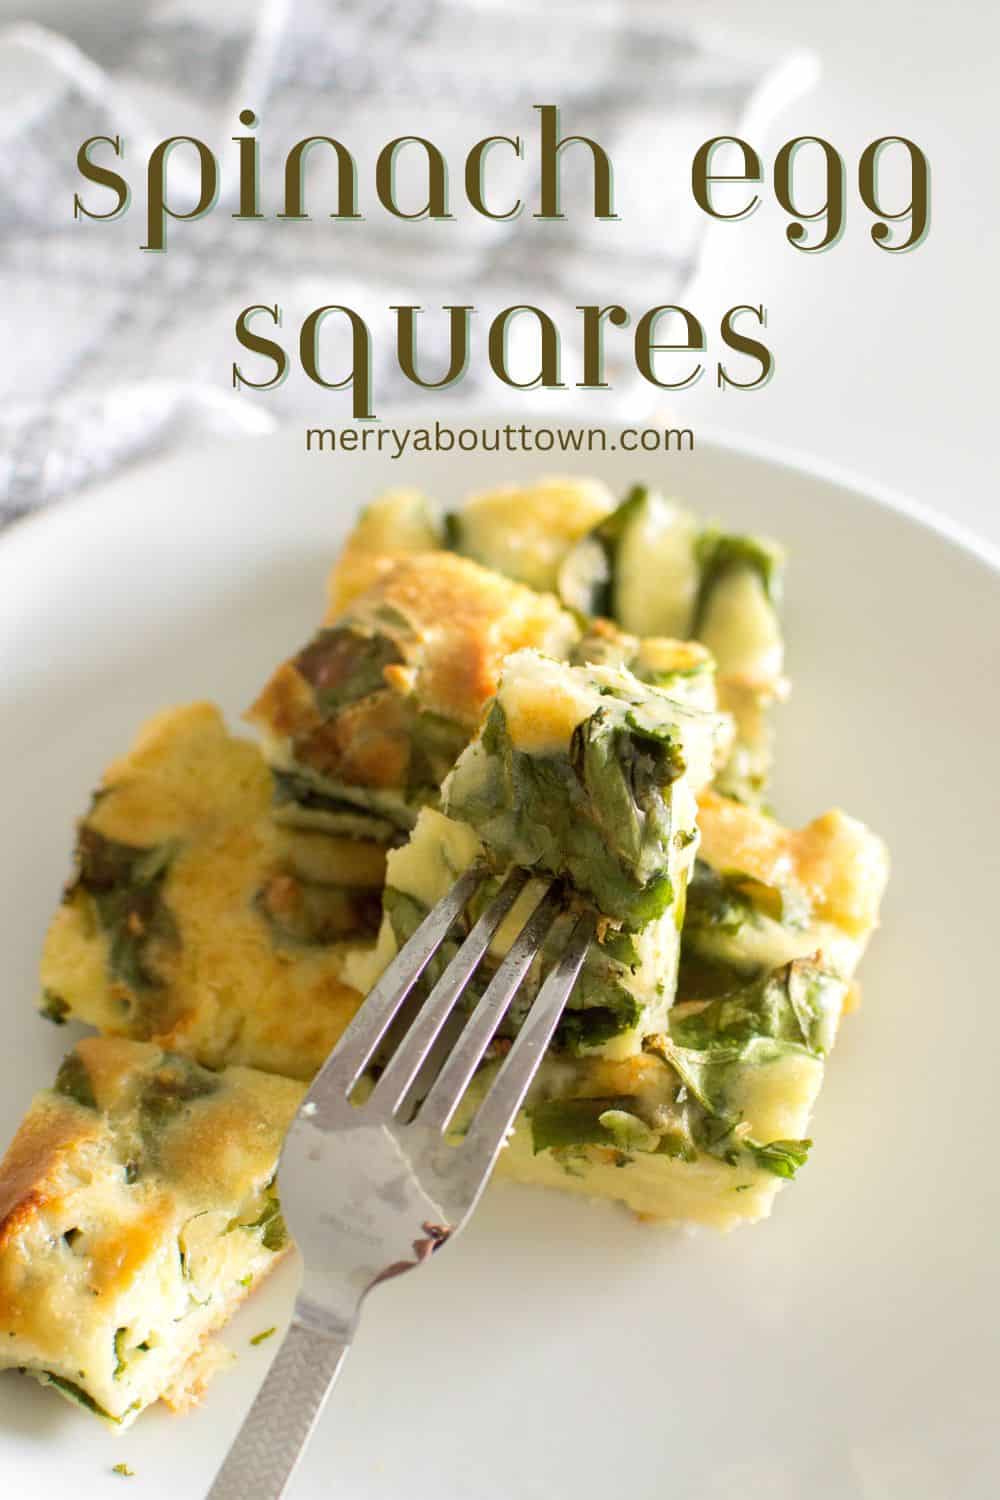 Spinach egg squares on a white plate